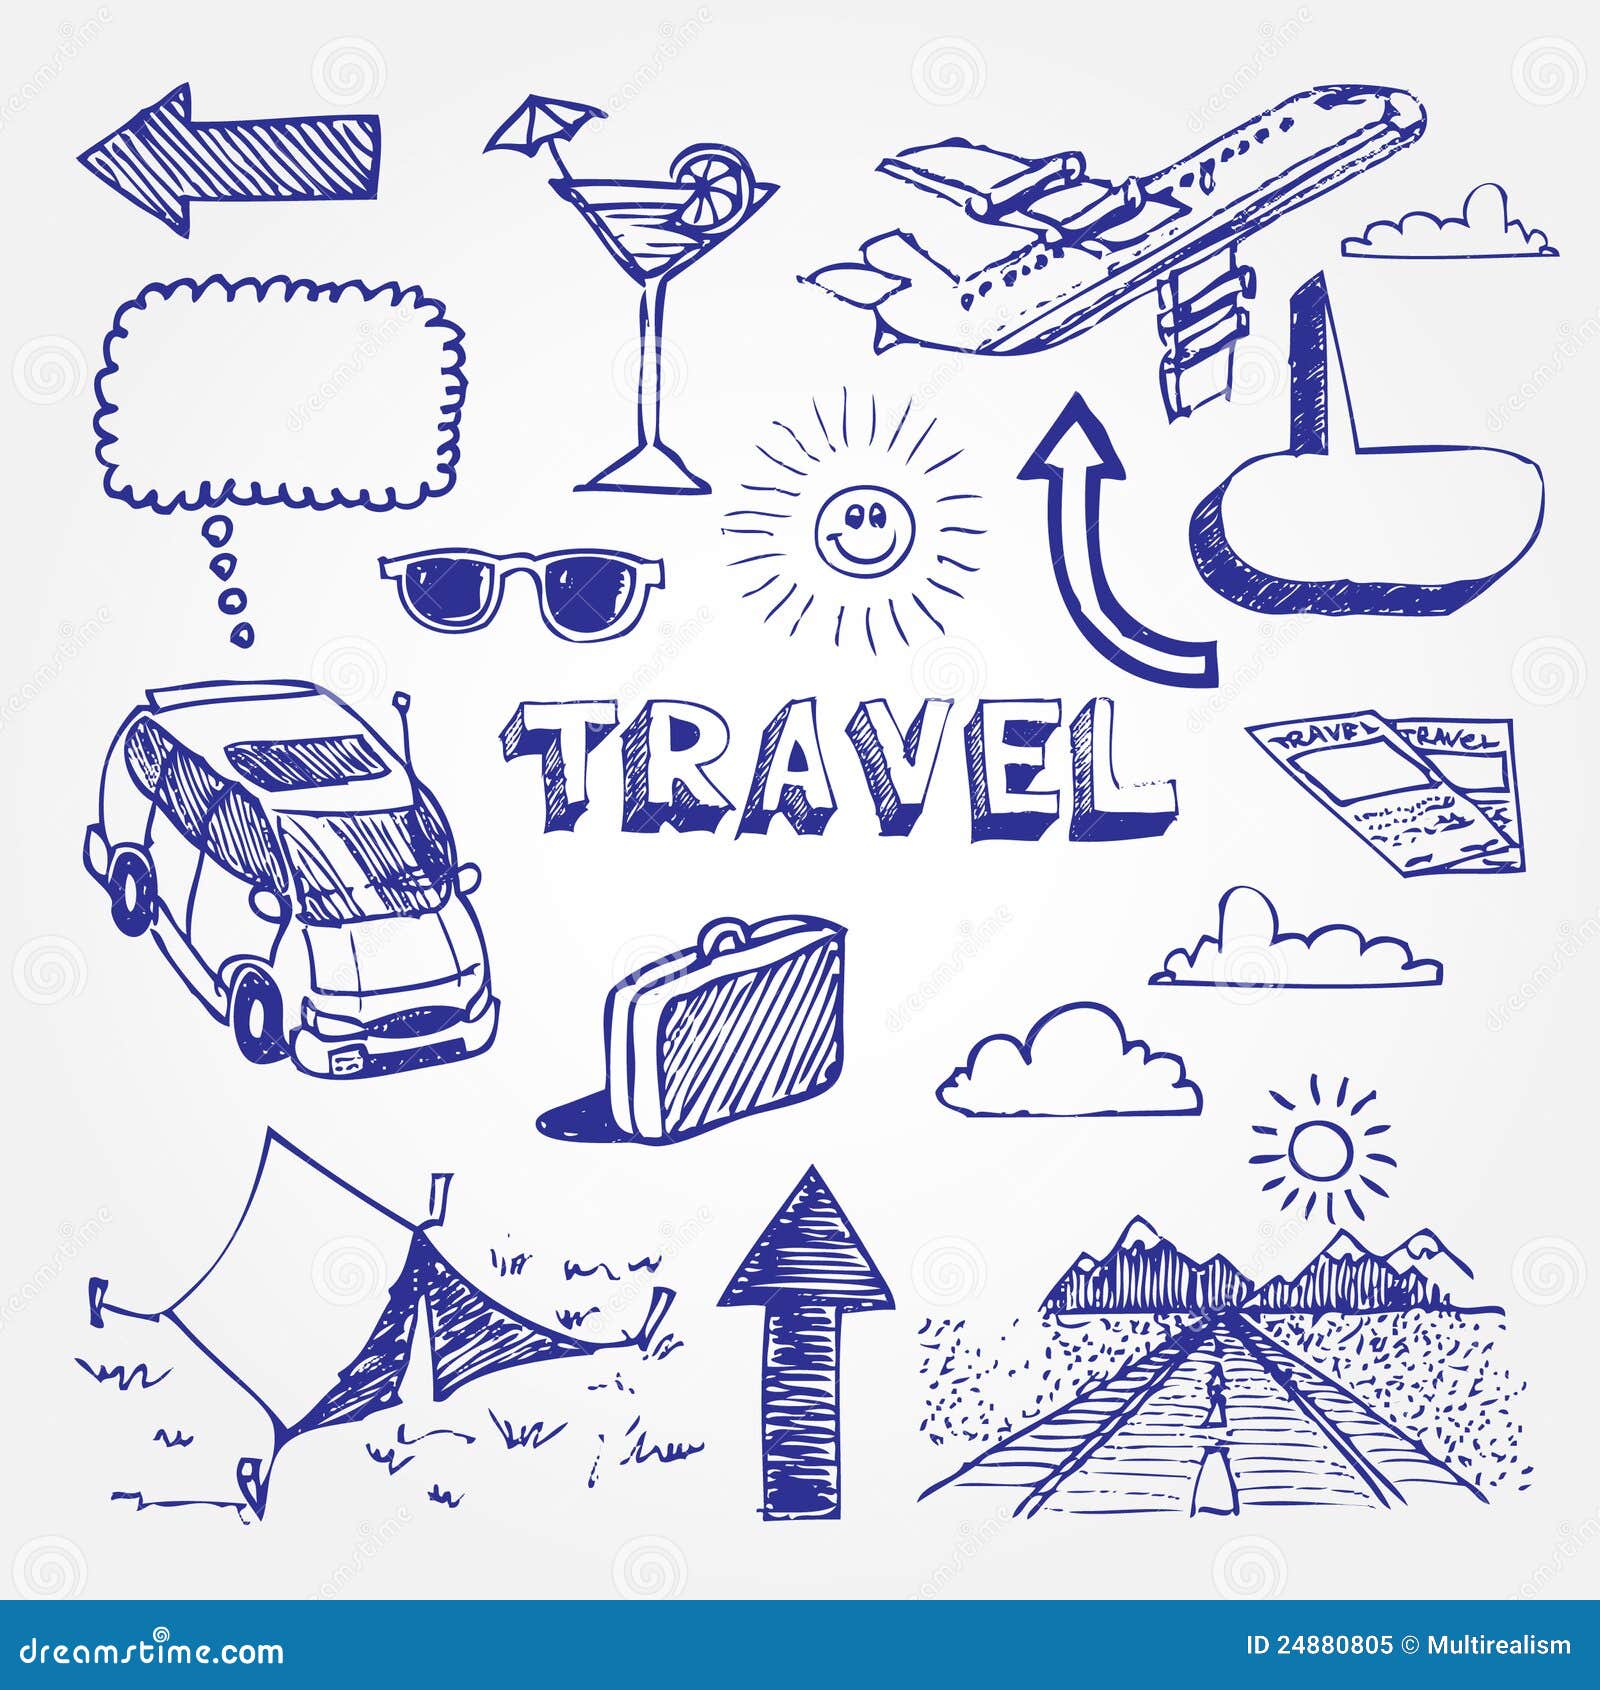 Travel icons set stock vector. Illustration of luggage - 24880805